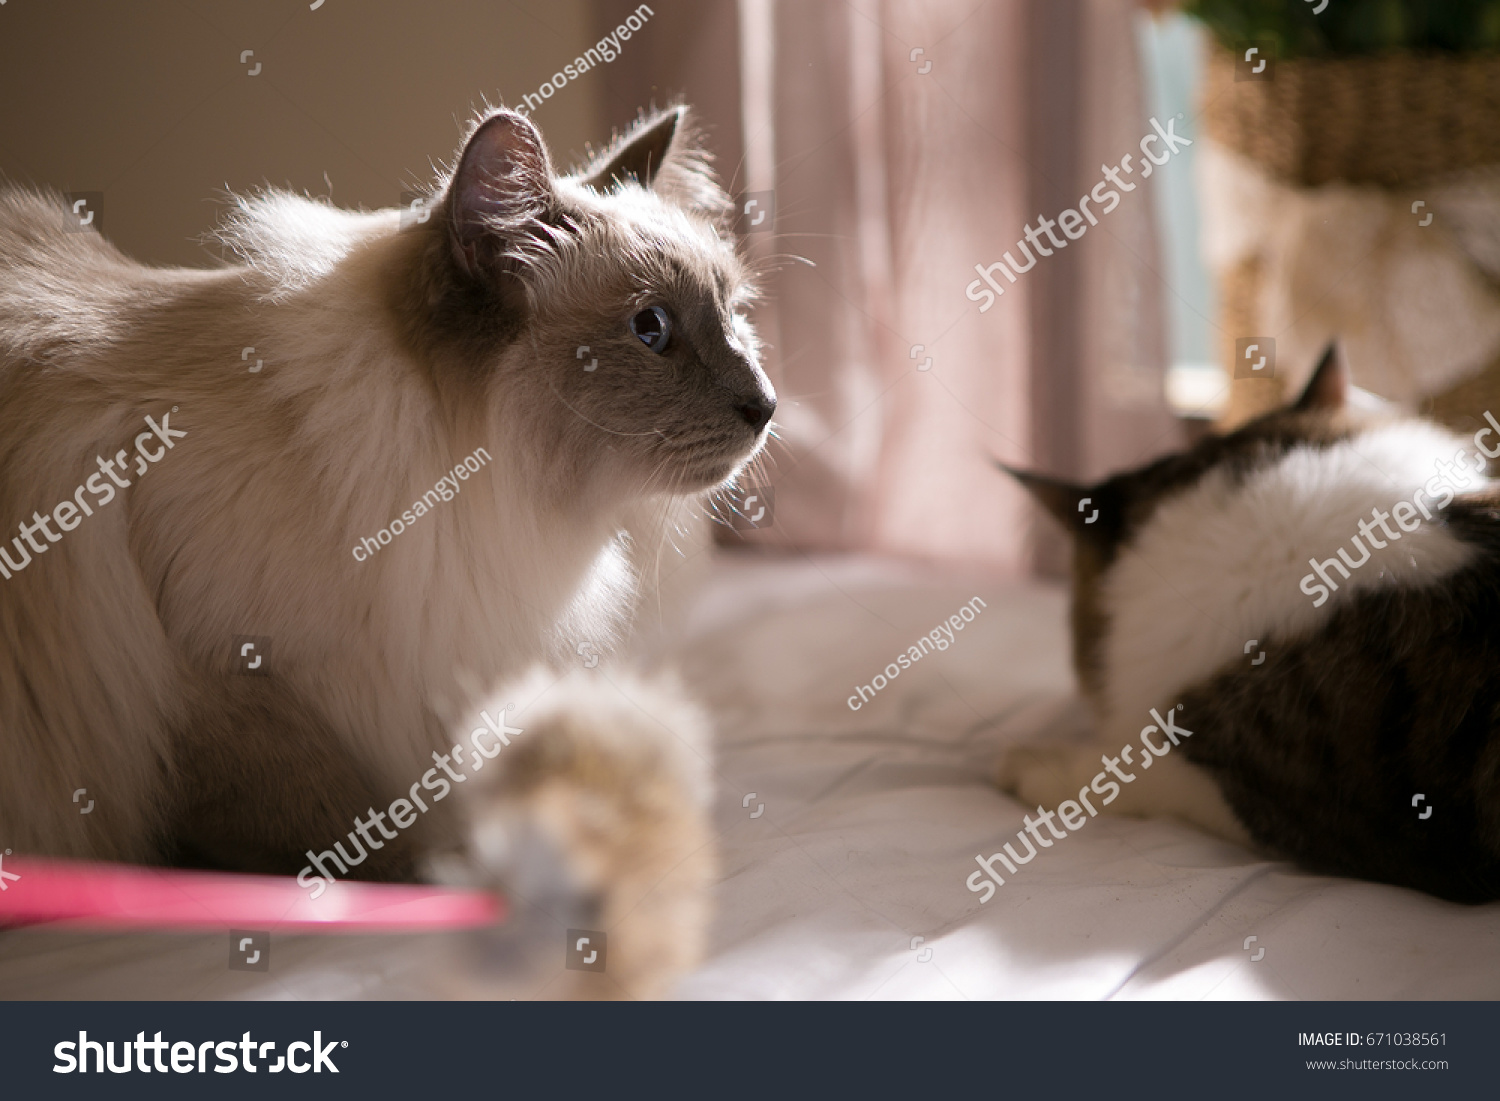 ragdoll on the bed #671038561